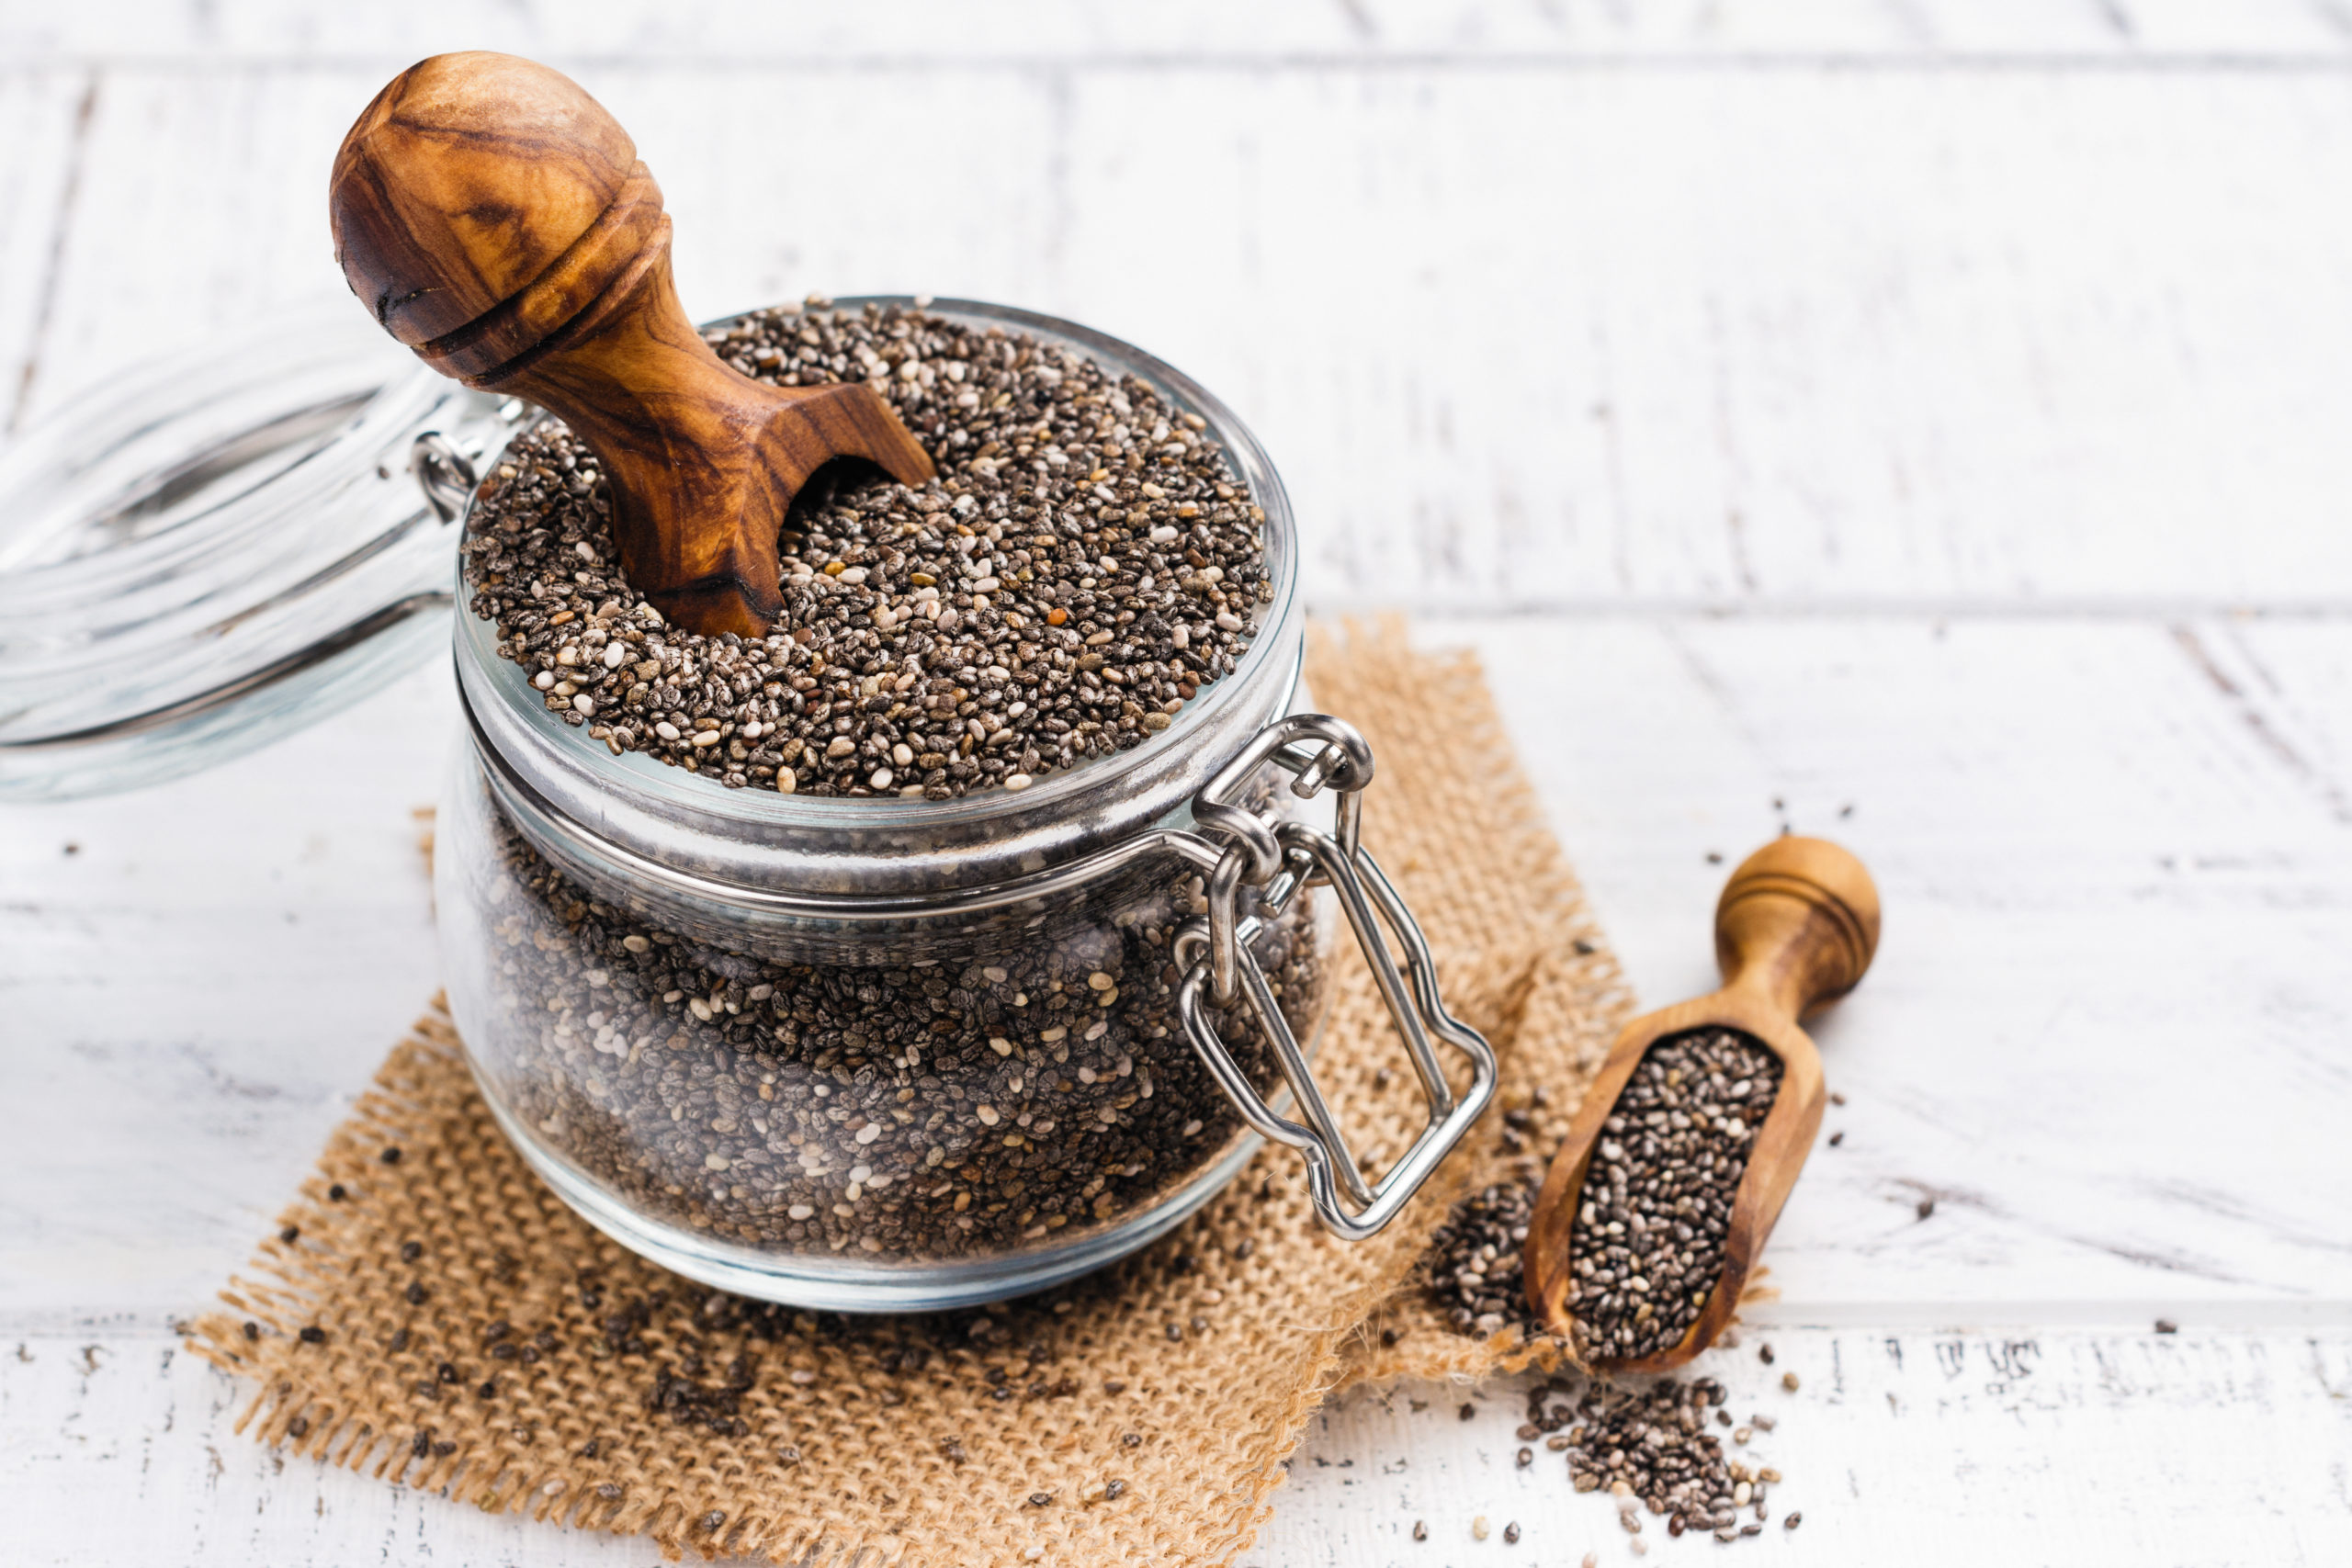 Small but Mighty: A Closer Look at the Chia Seed